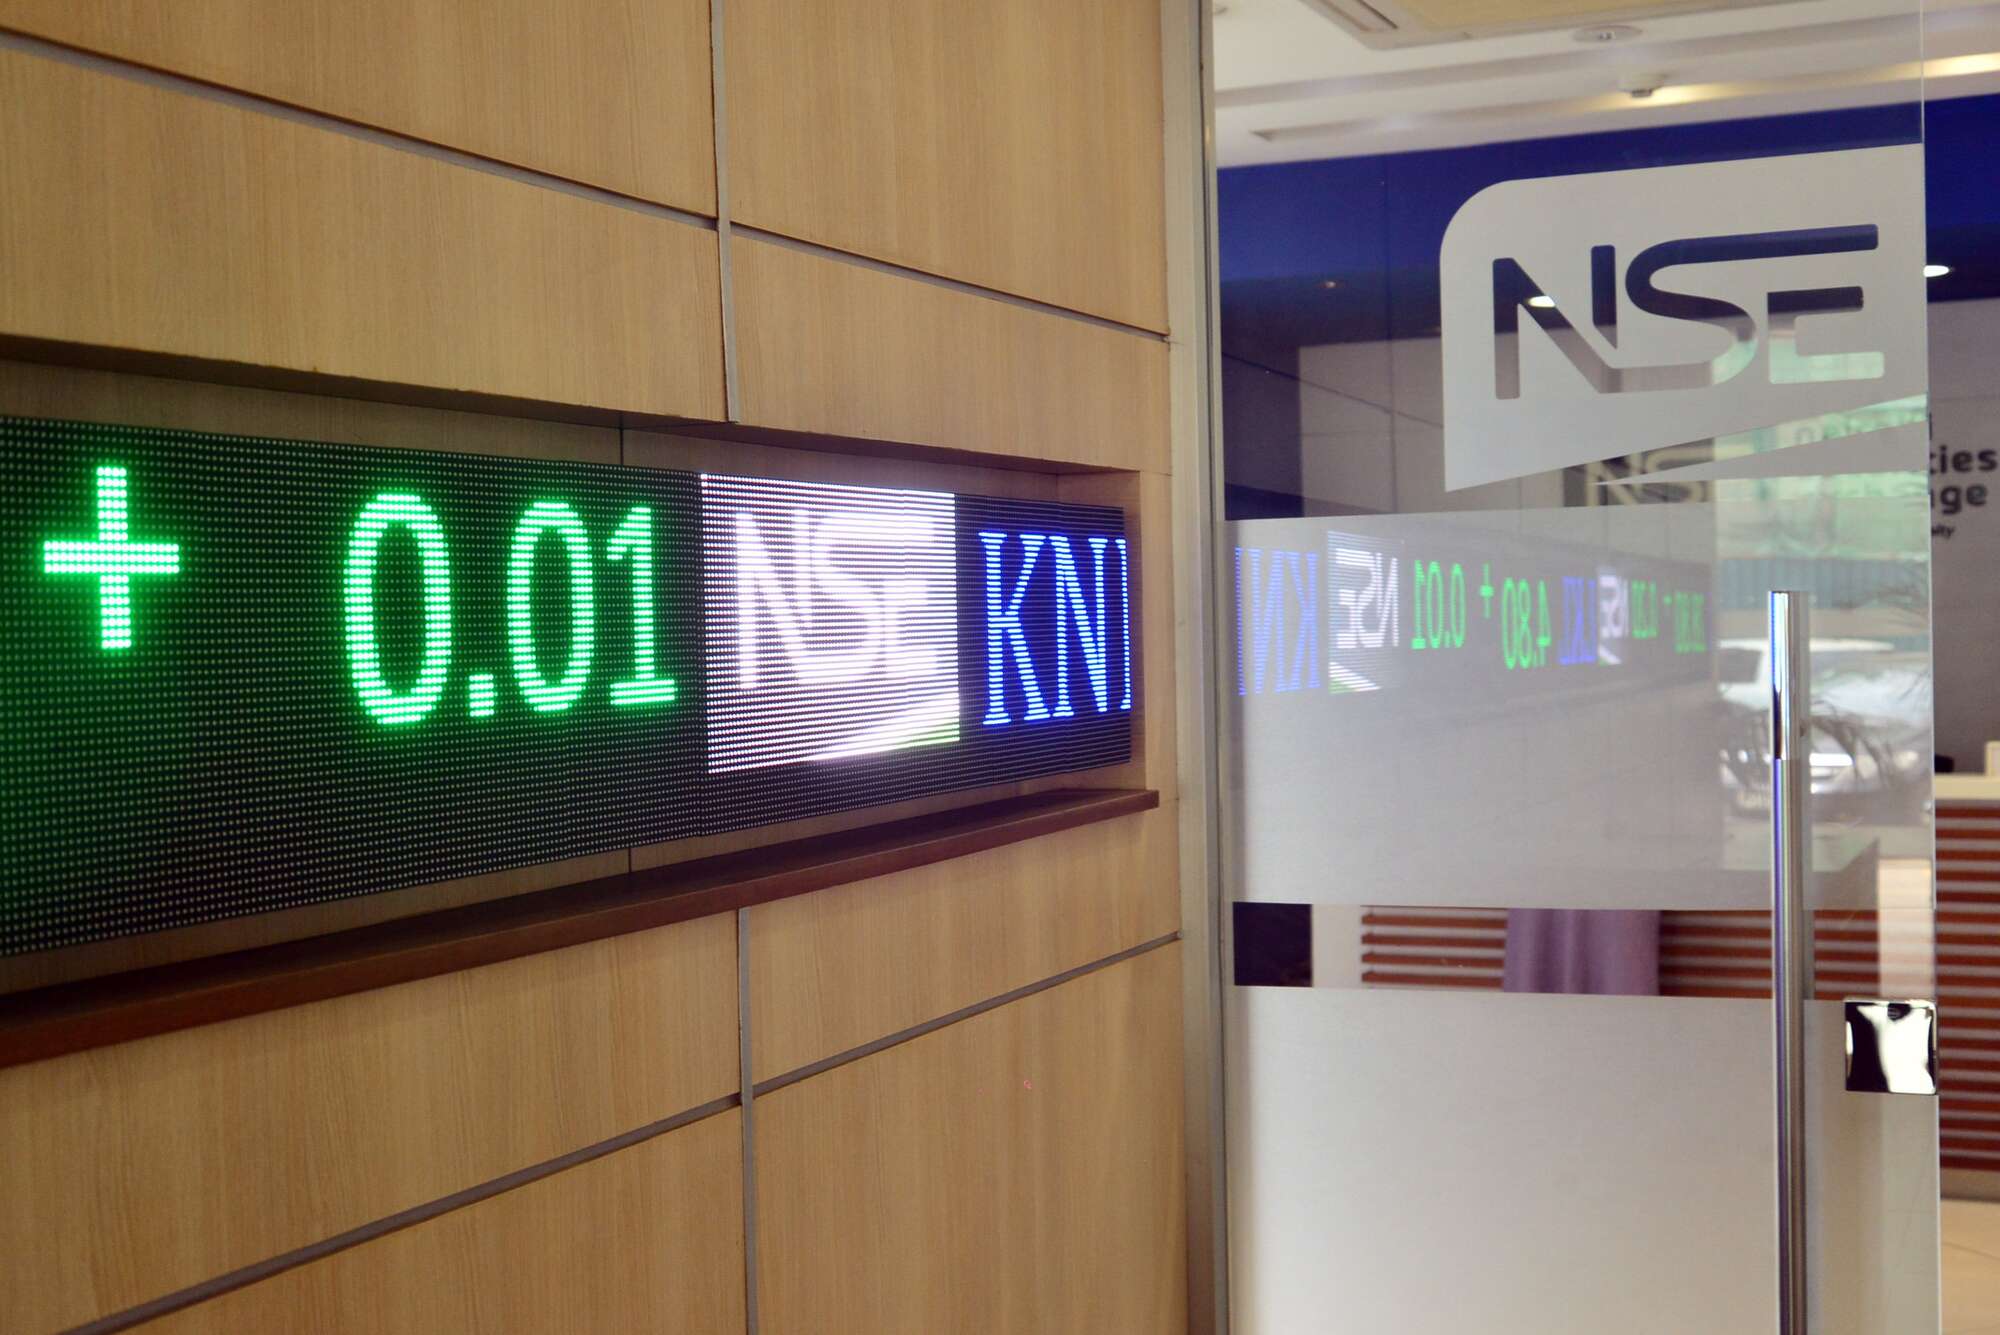 NSE Sees Significant Growth Powered by Safaricom and Banks